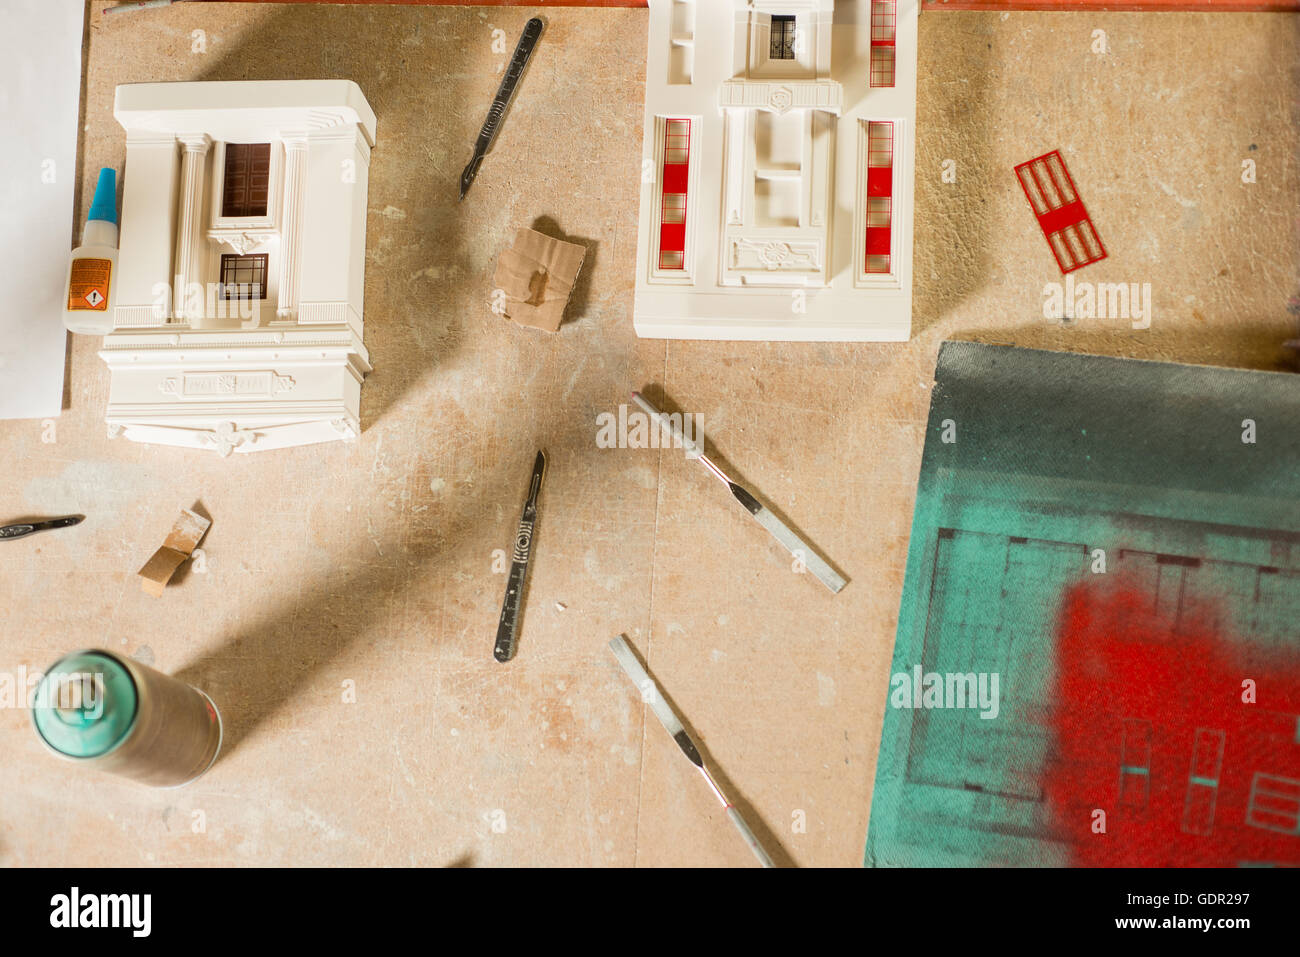 A couple of plaster scale model architectural buildings and their parts, tools, and materials including blades, files, glue, and Stock Photo